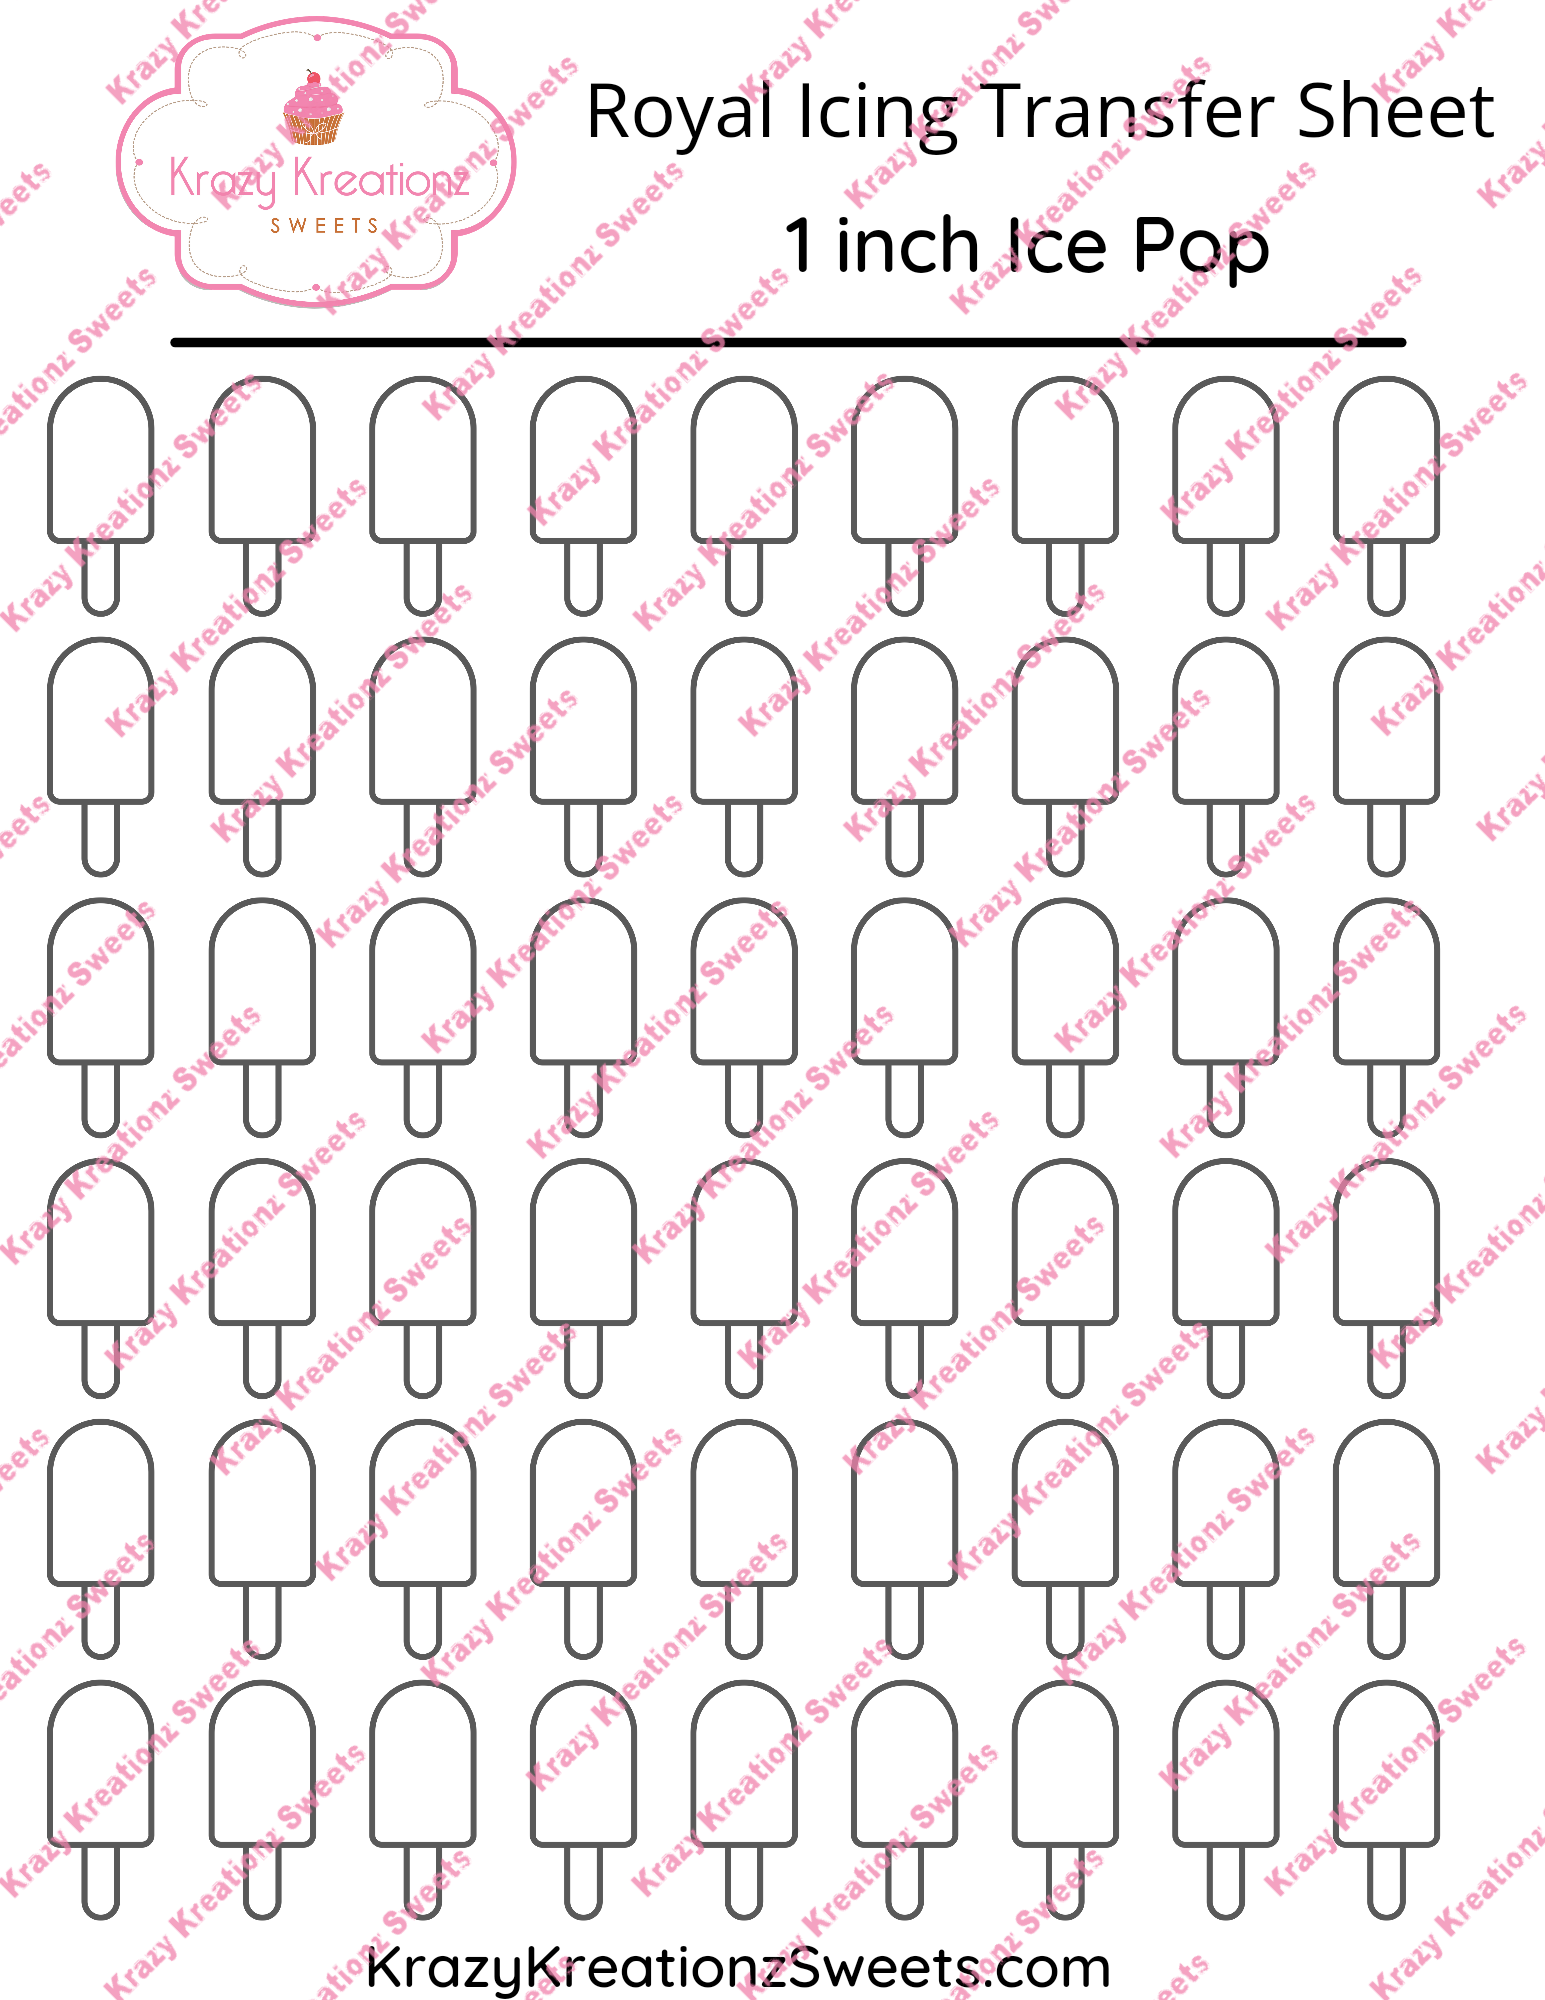 Popsicle - 1 inch - Royal Icing Transfer Sheet